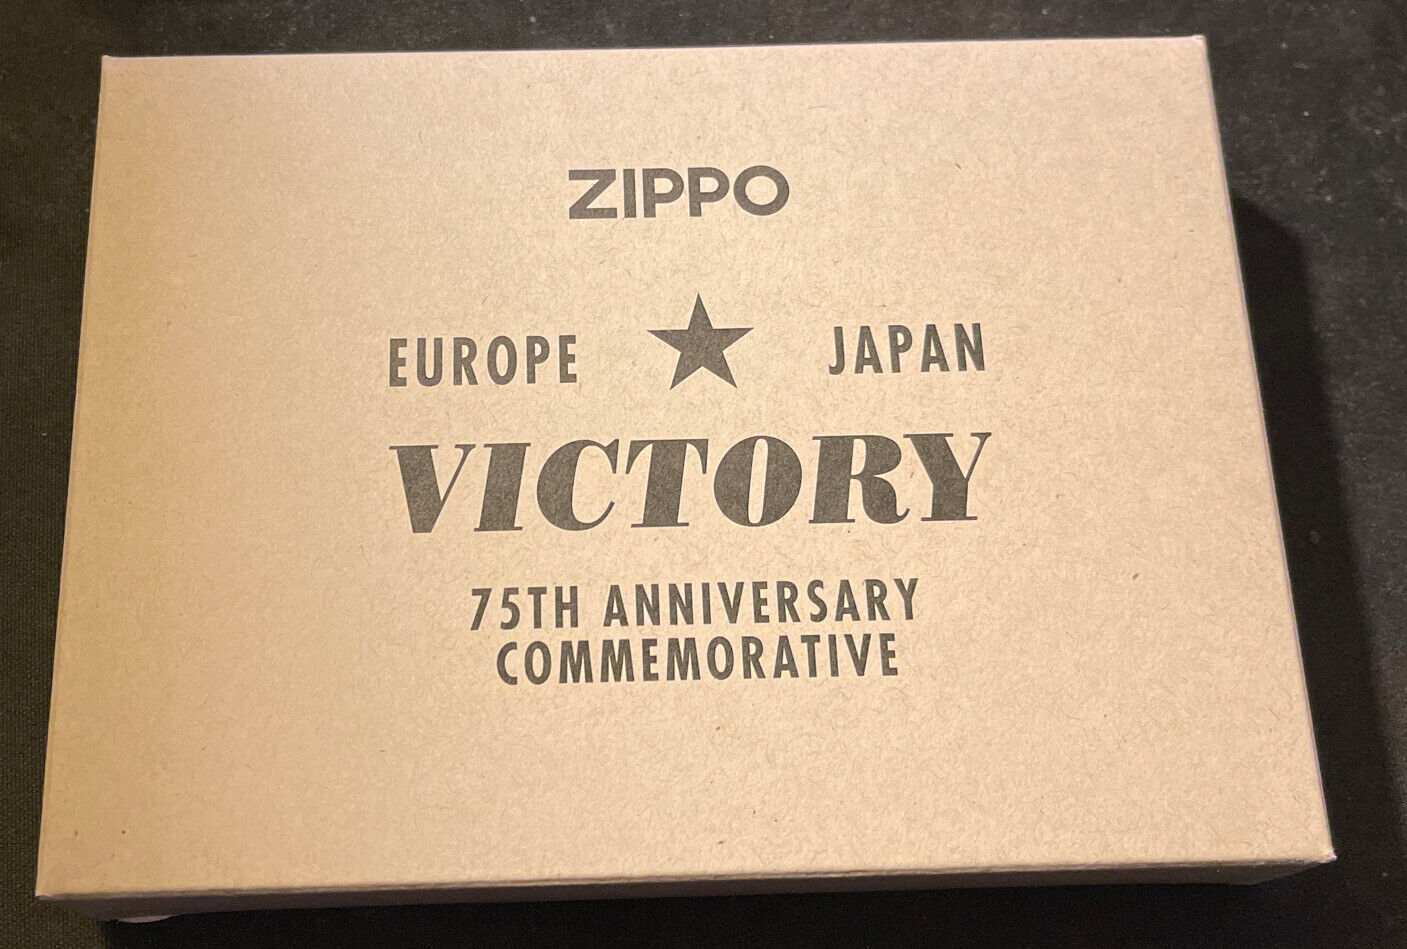 Zippo Europe Japan Victory 75th Anniversary Commemorative Collectable Lighter